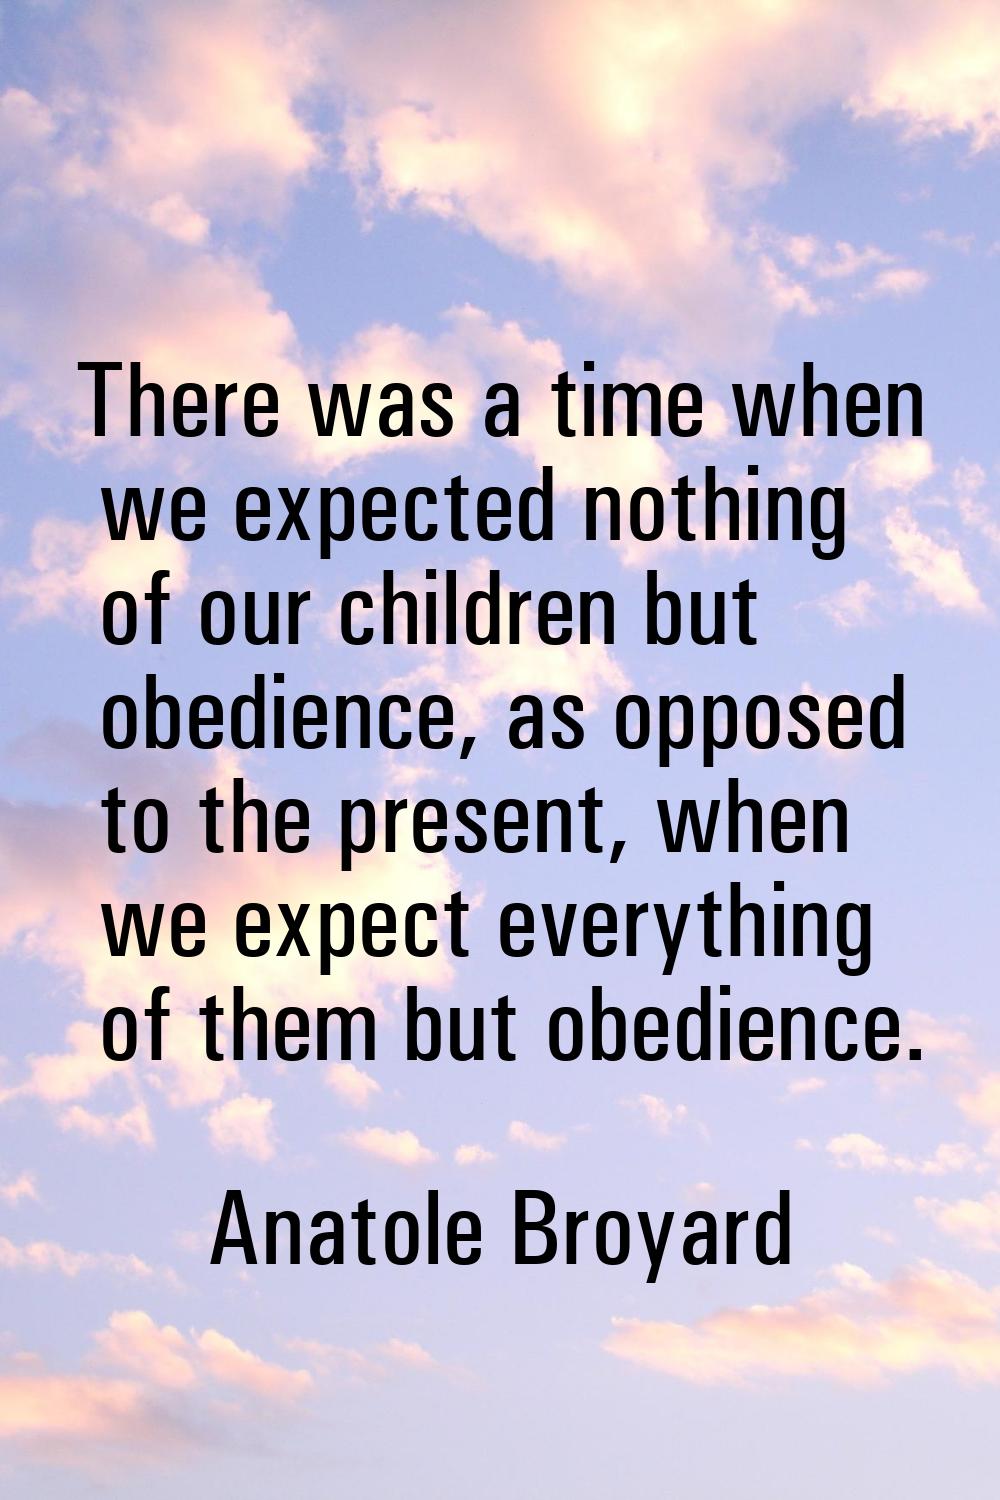 There was a time when we expected nothing of our children but obedience, as opposed to the present,